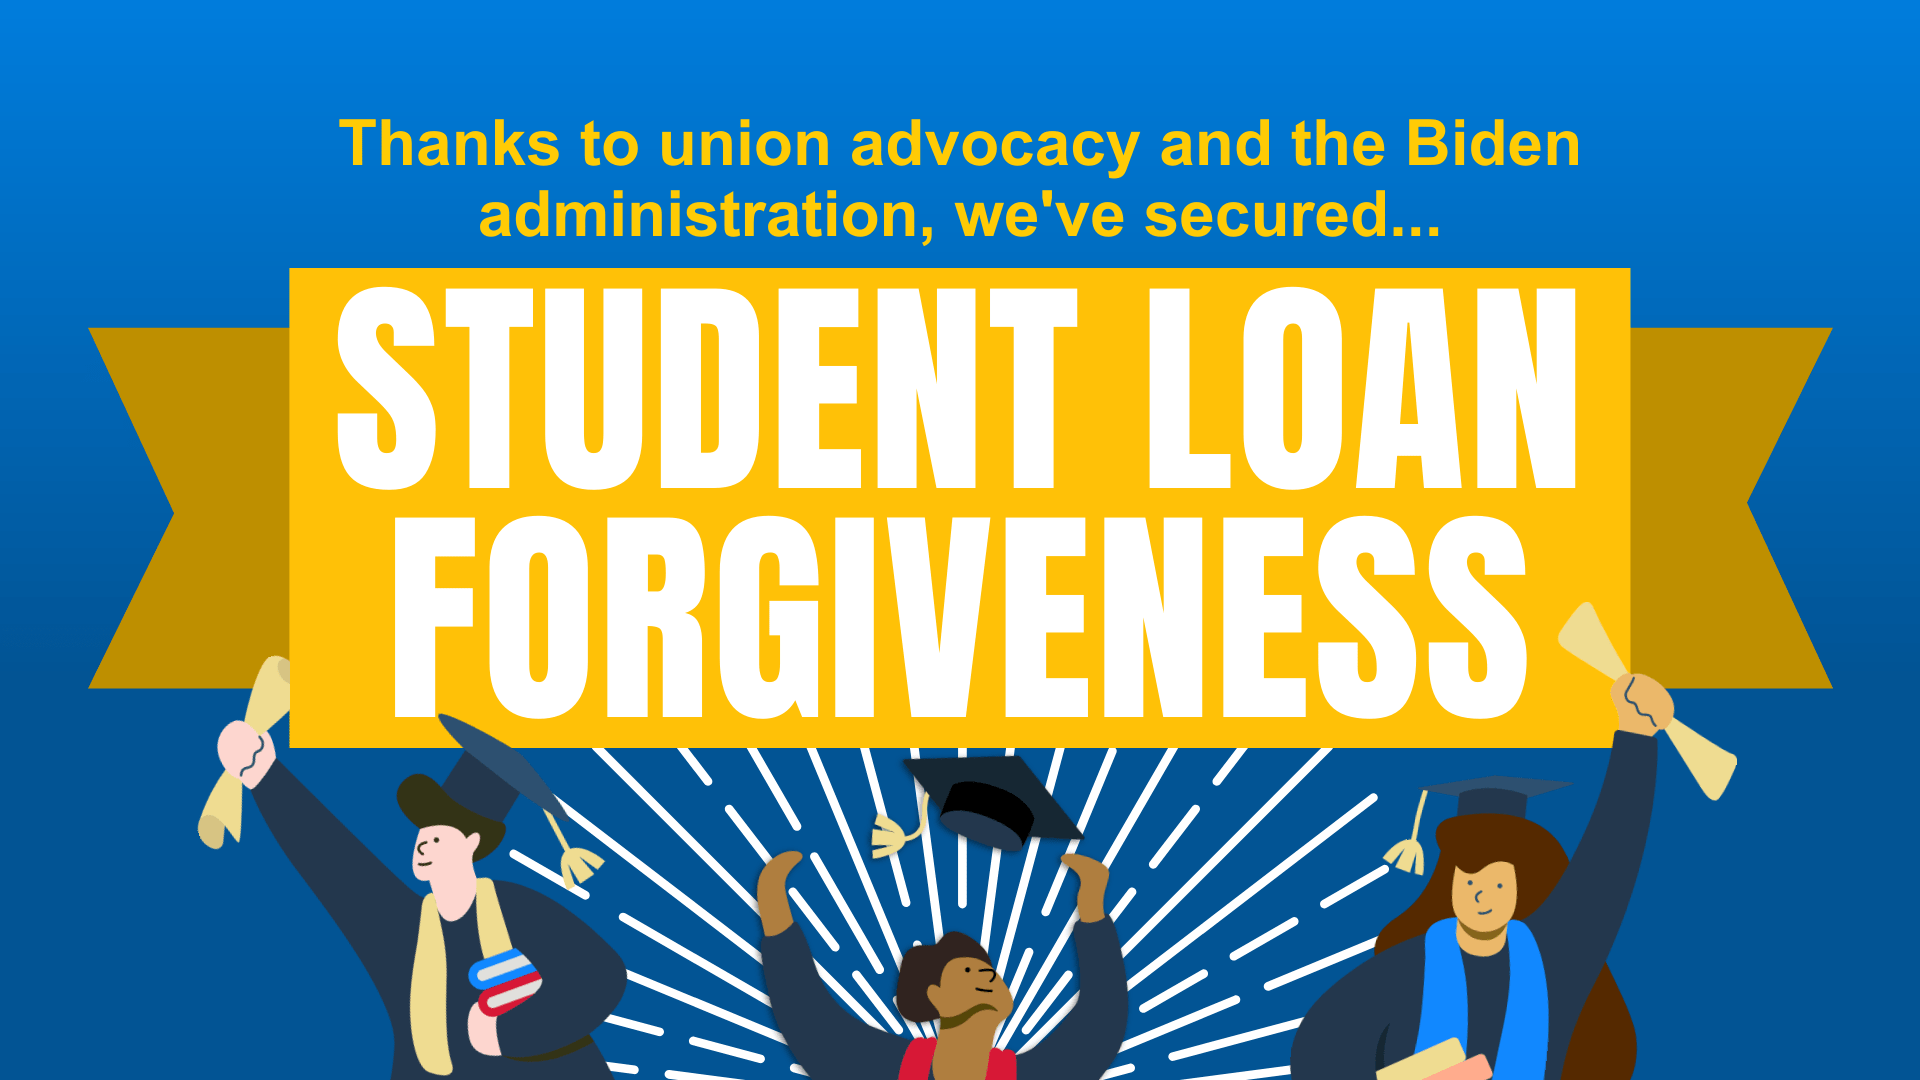 Thanks to union advocacy, student loan is a reality